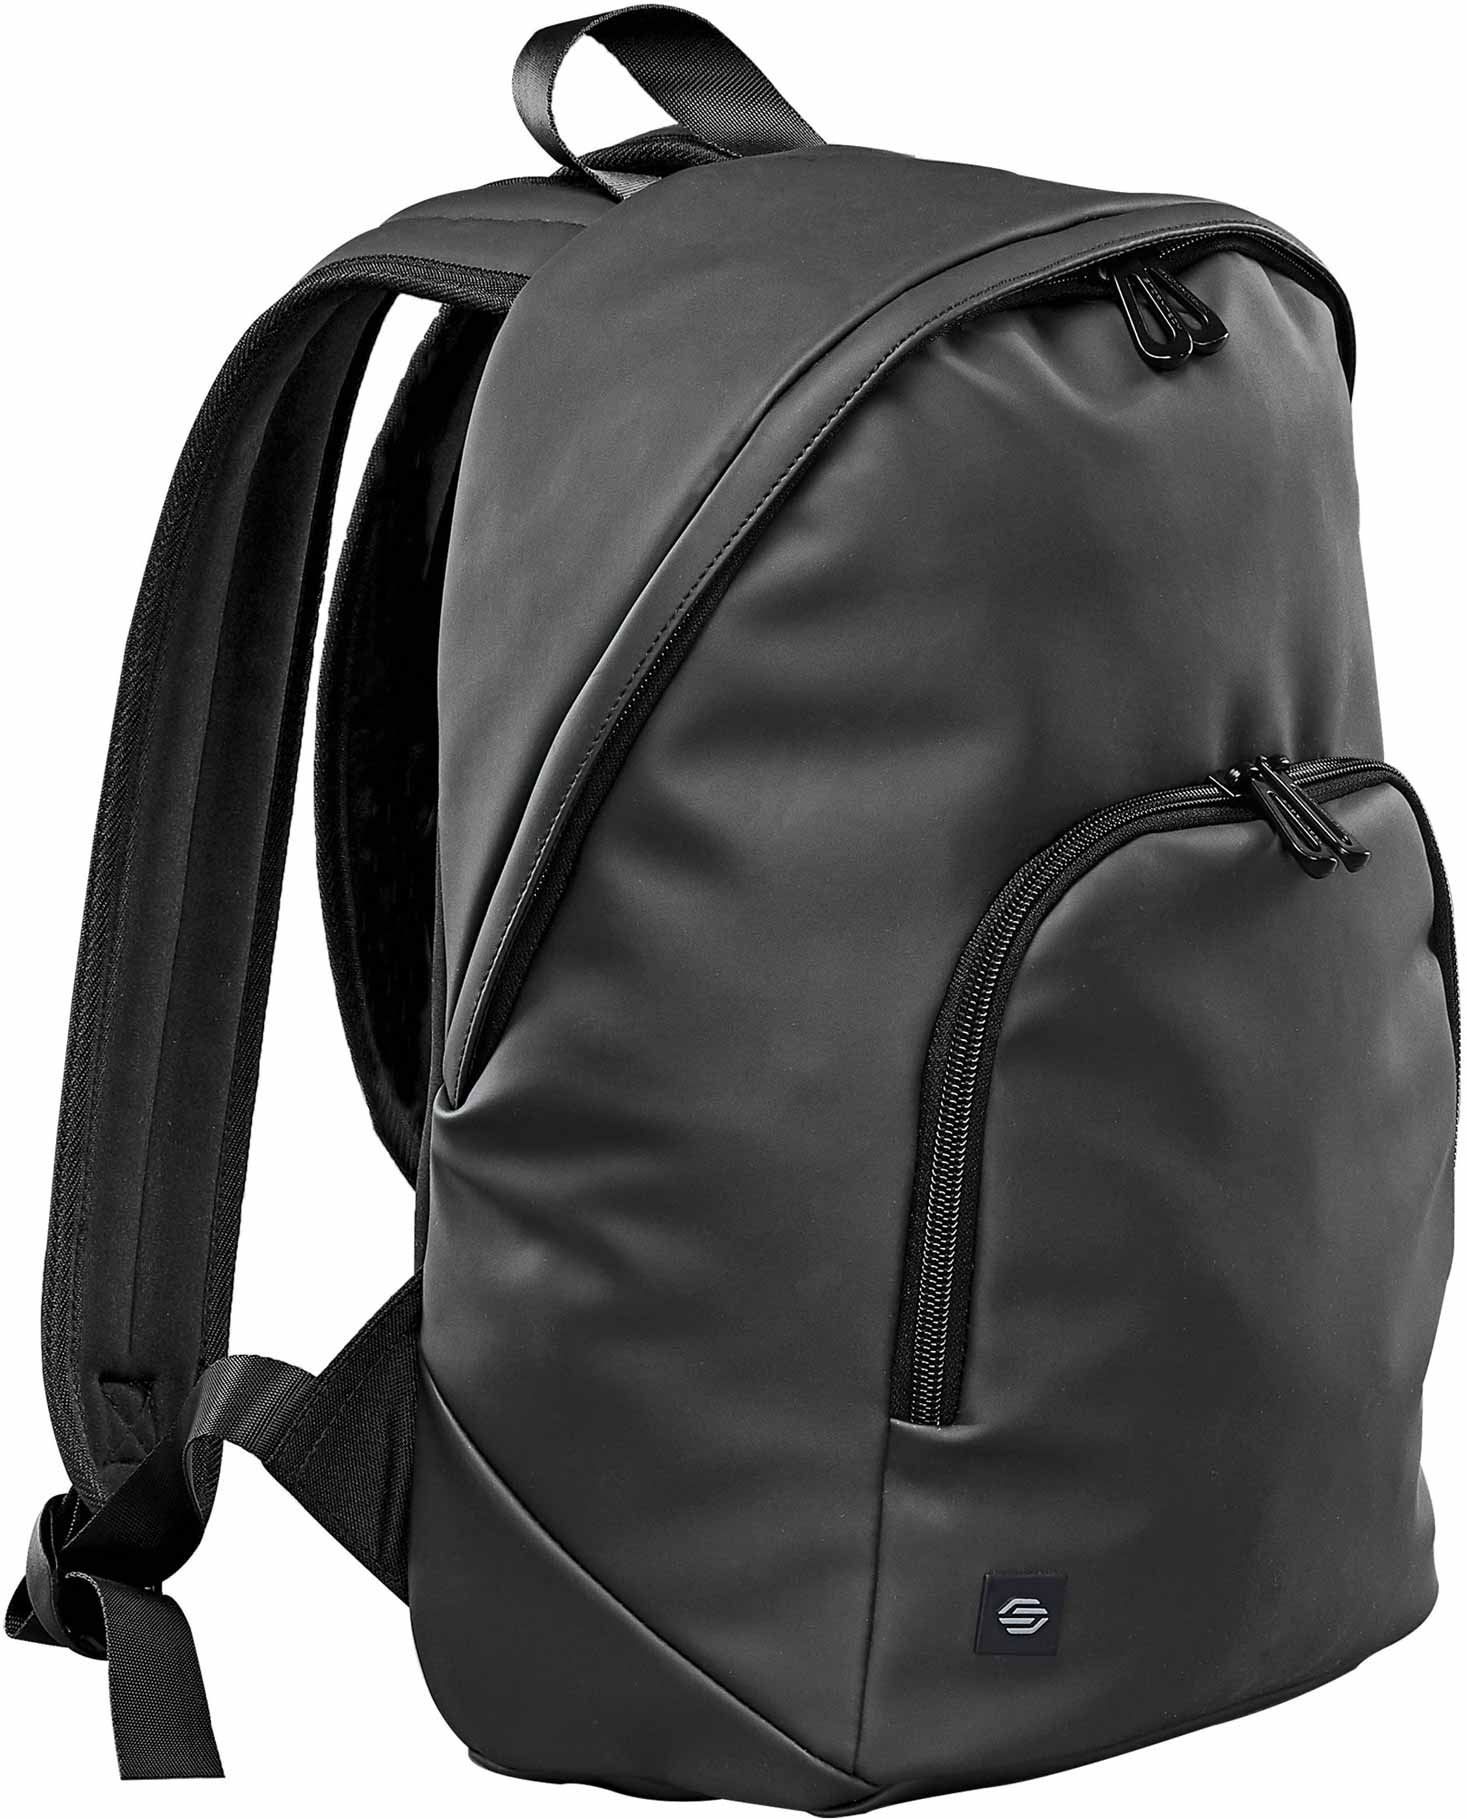 JCSWX-2  Nomad Day Pack